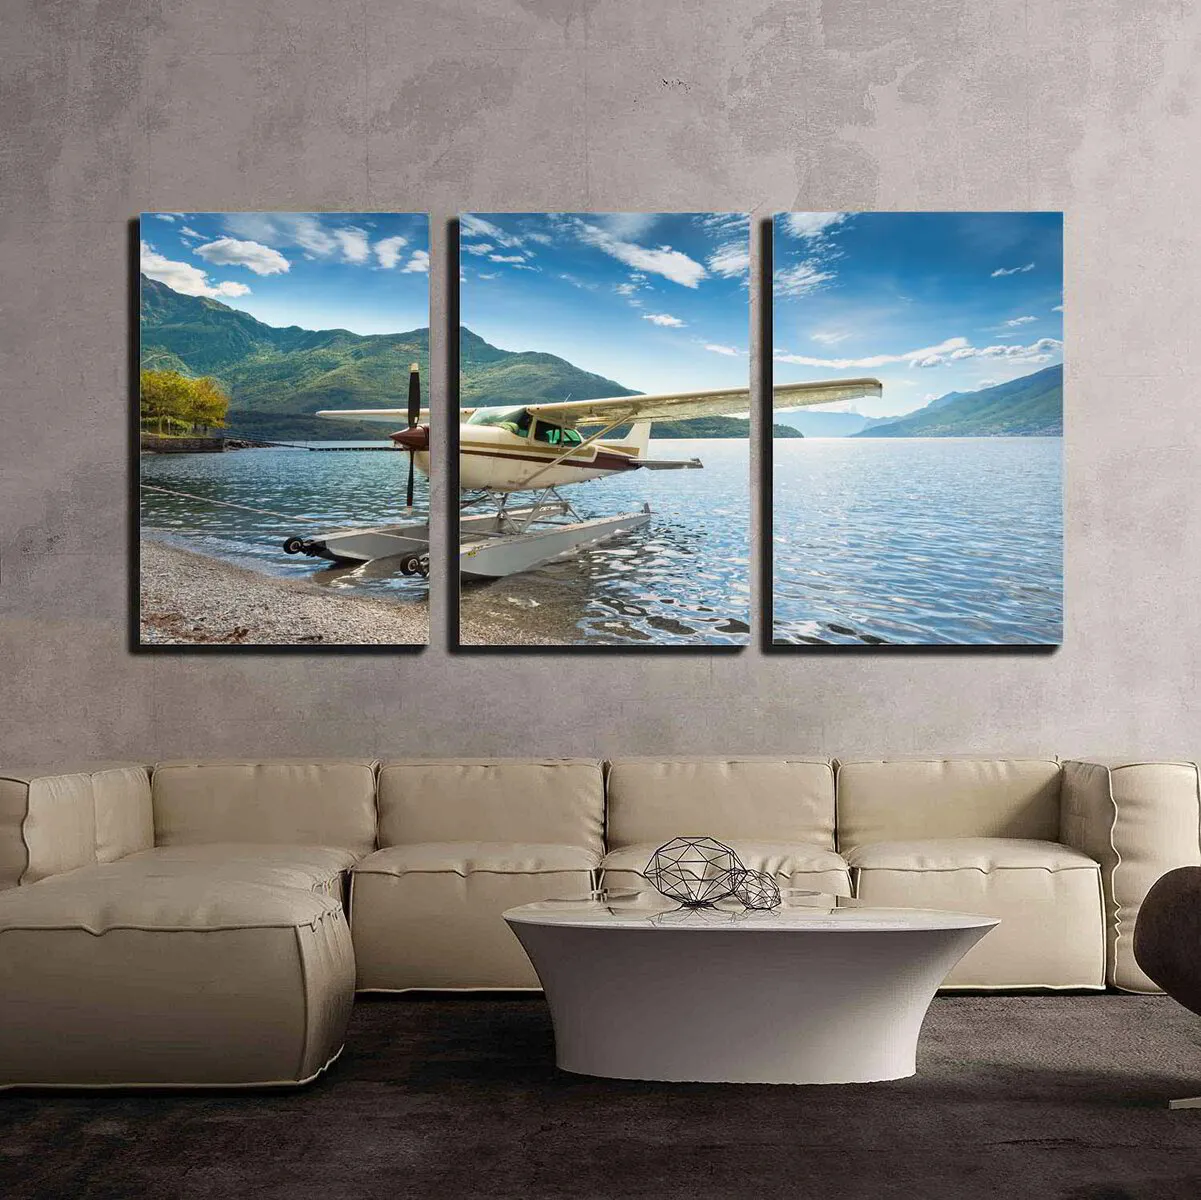 S3 Printed Acoustic Panels - Water Plane on Beach - 3 Panels